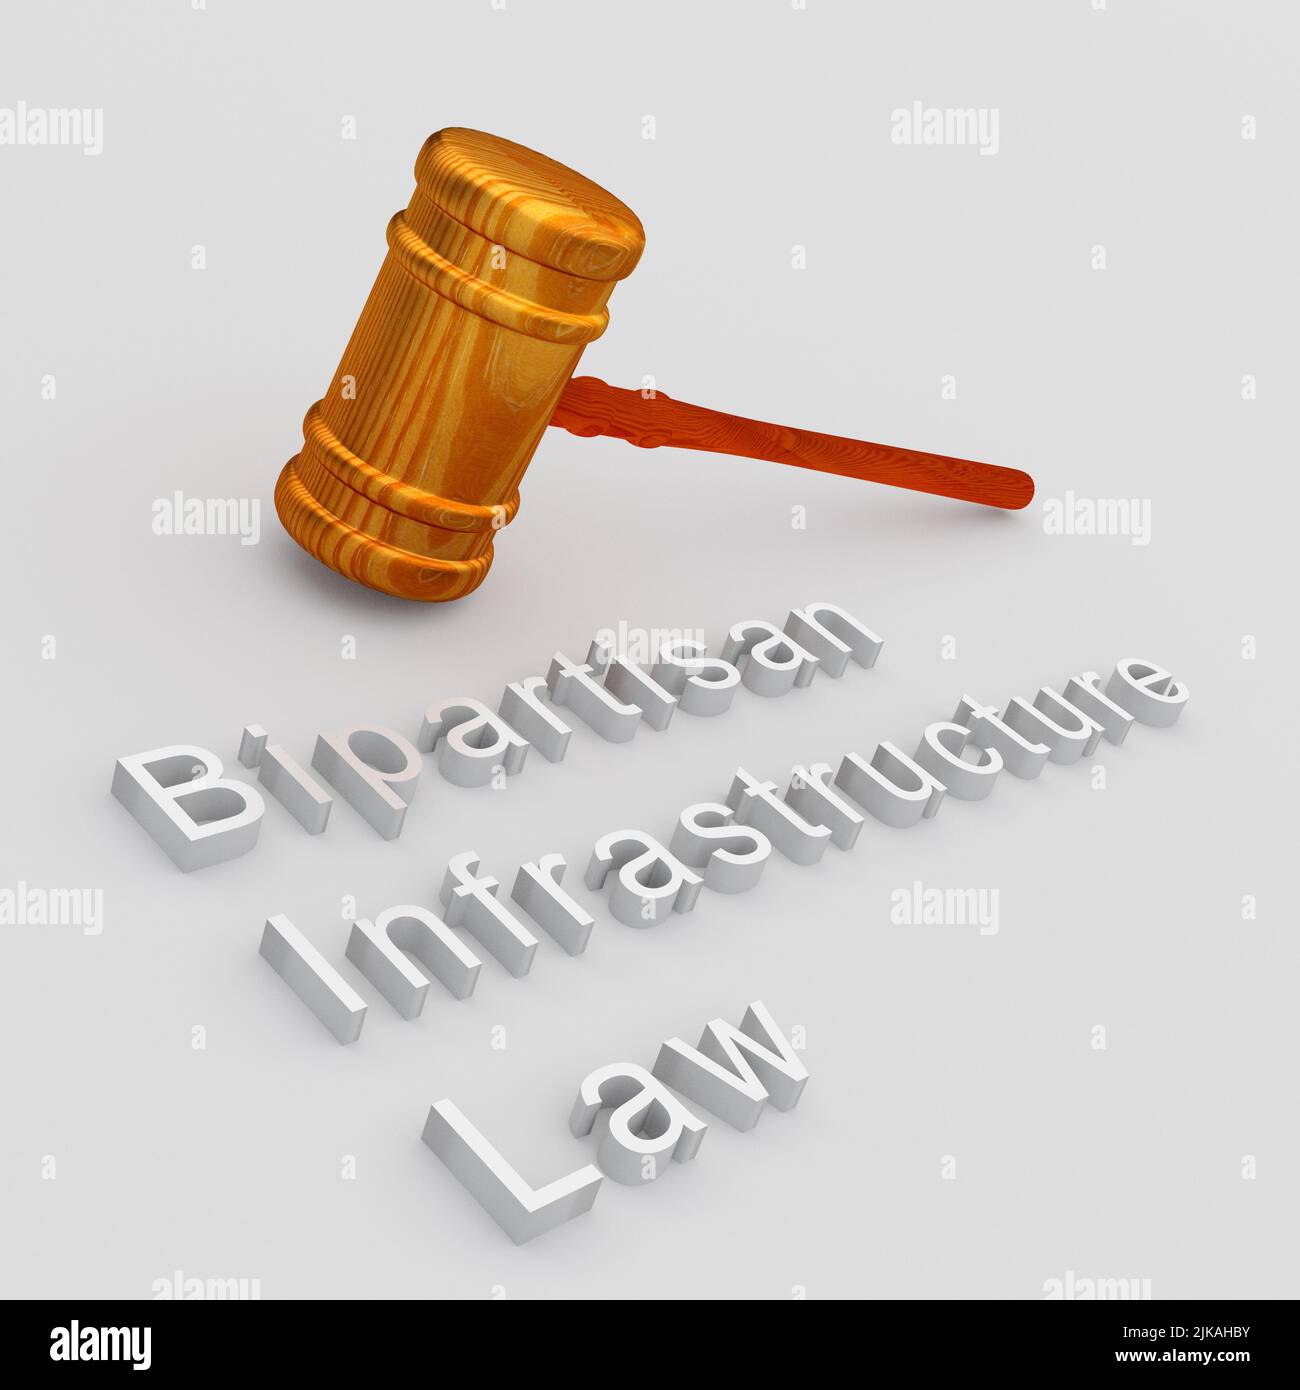 3D illustration of Bipartisan Infrastructure Law title under a judge gavel Stock Photo